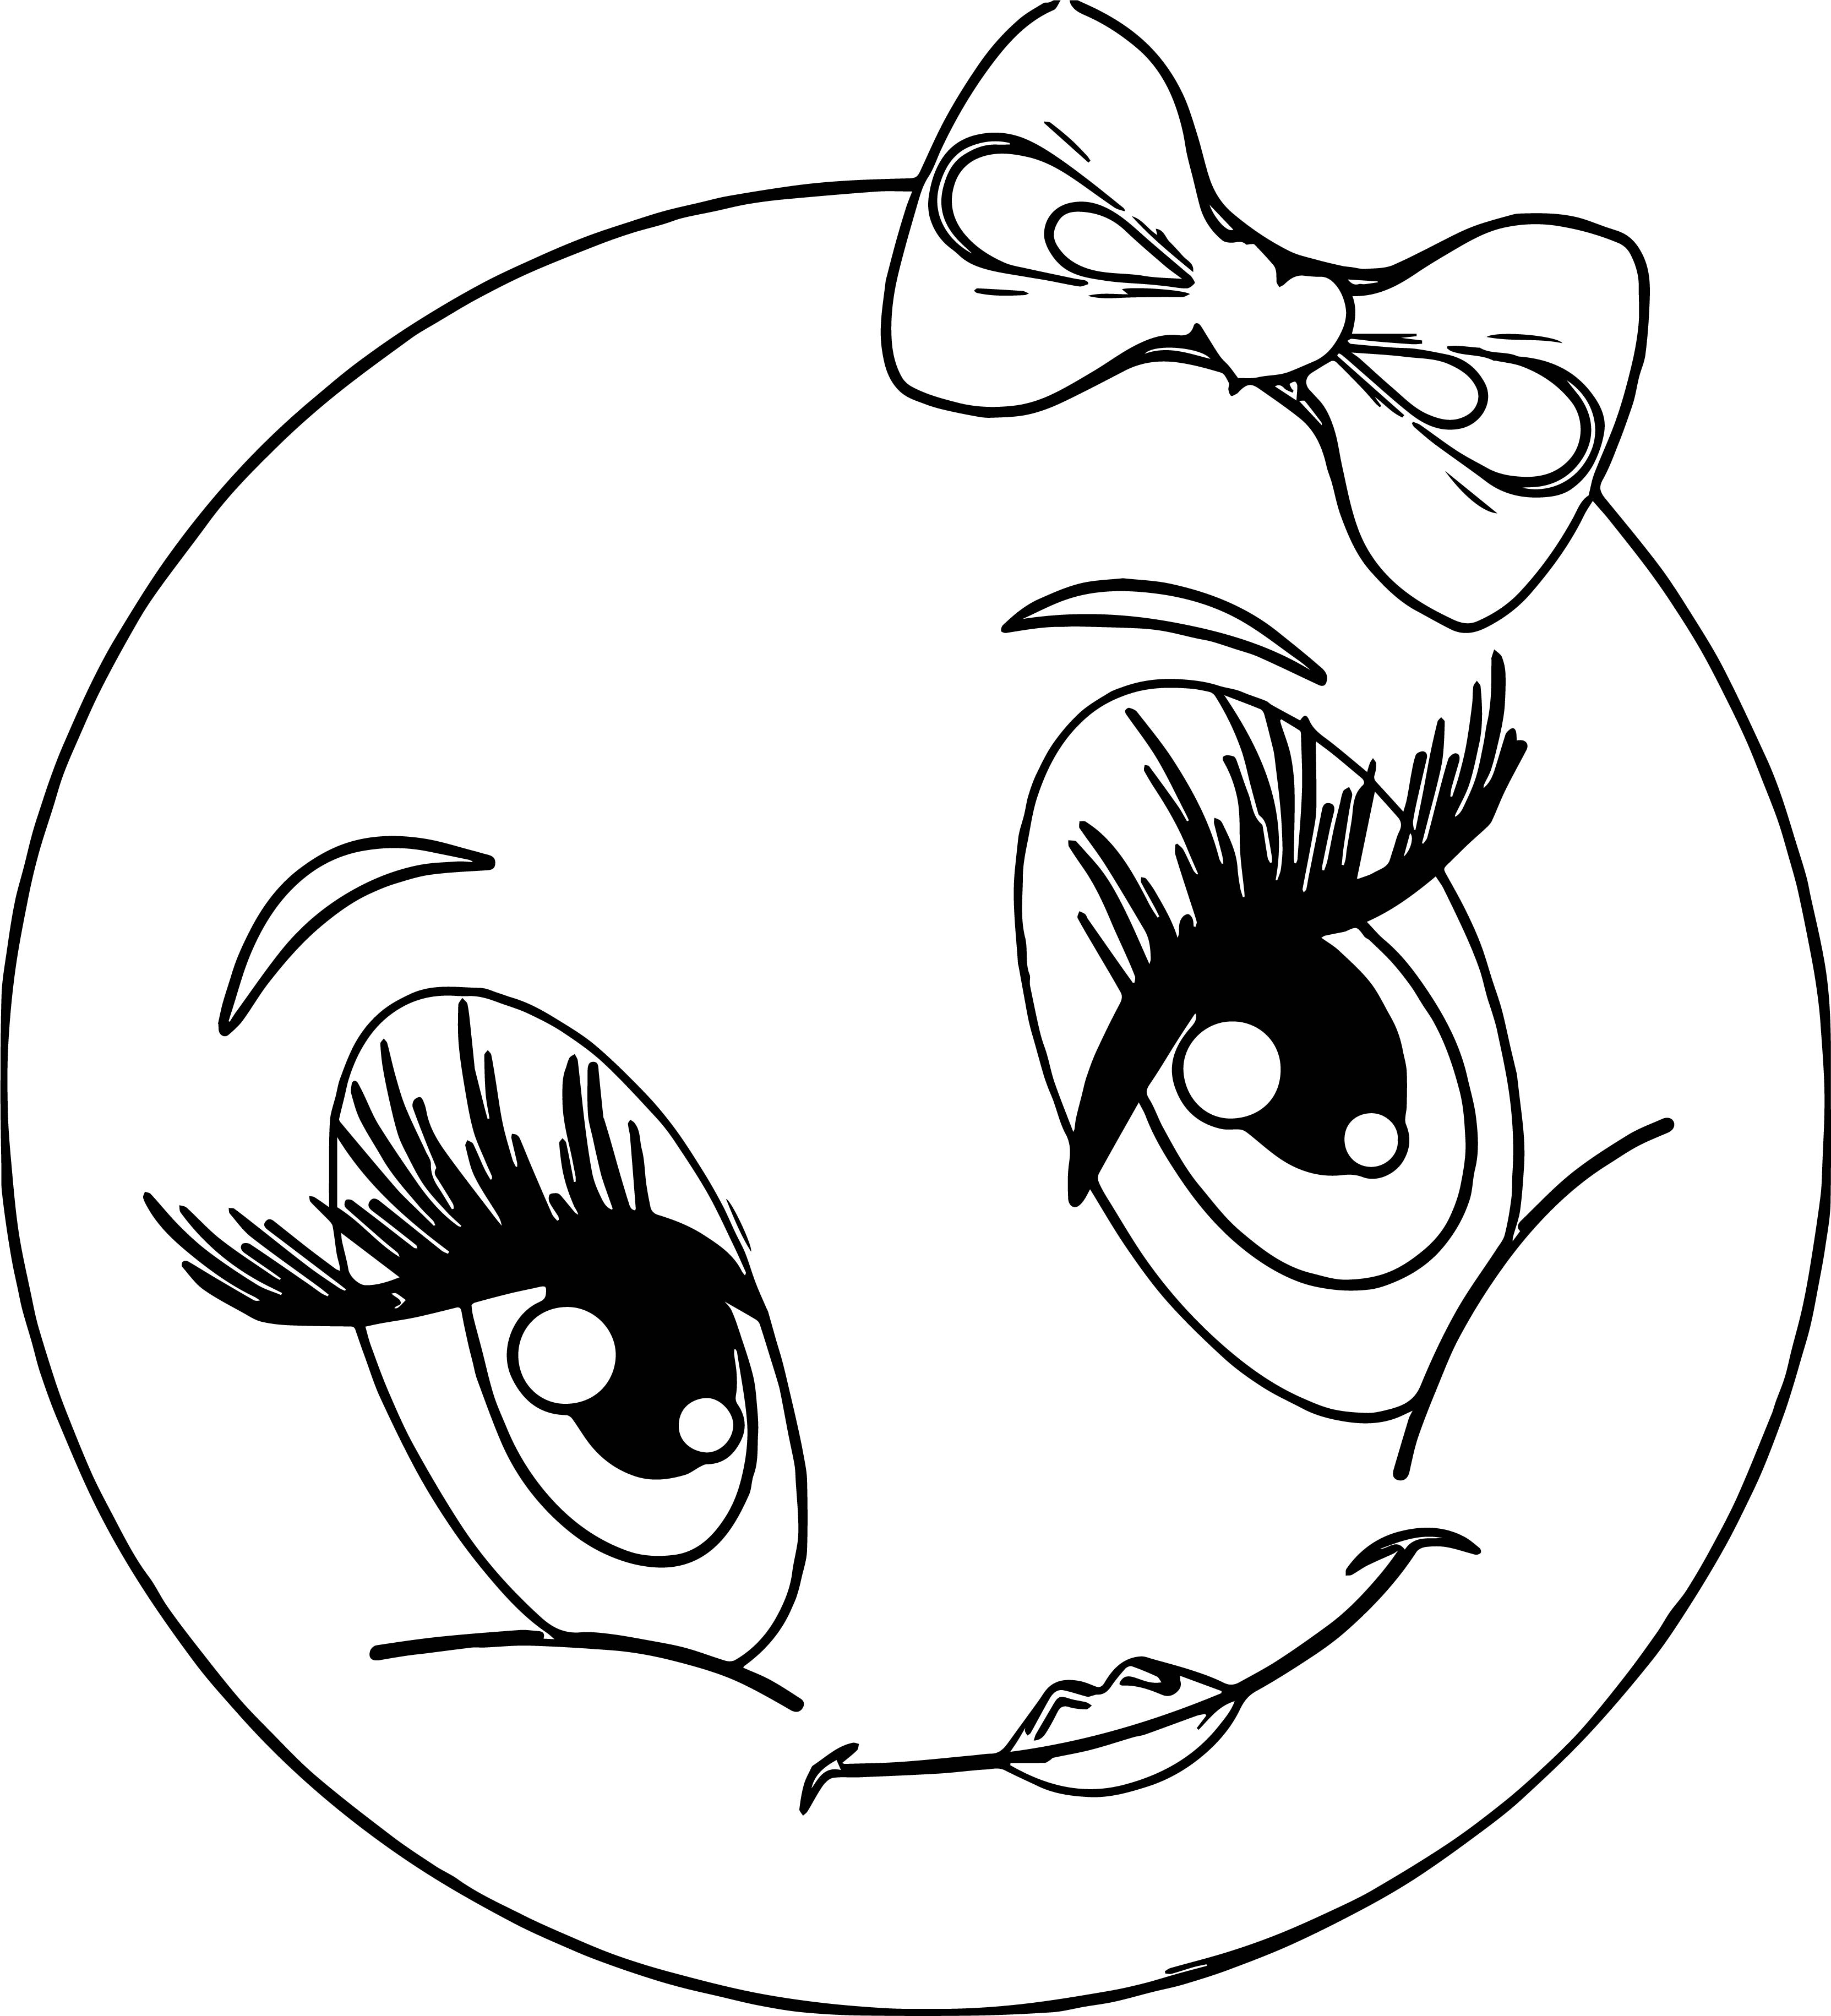 Cute Girl Smiley Faces Coloring Page